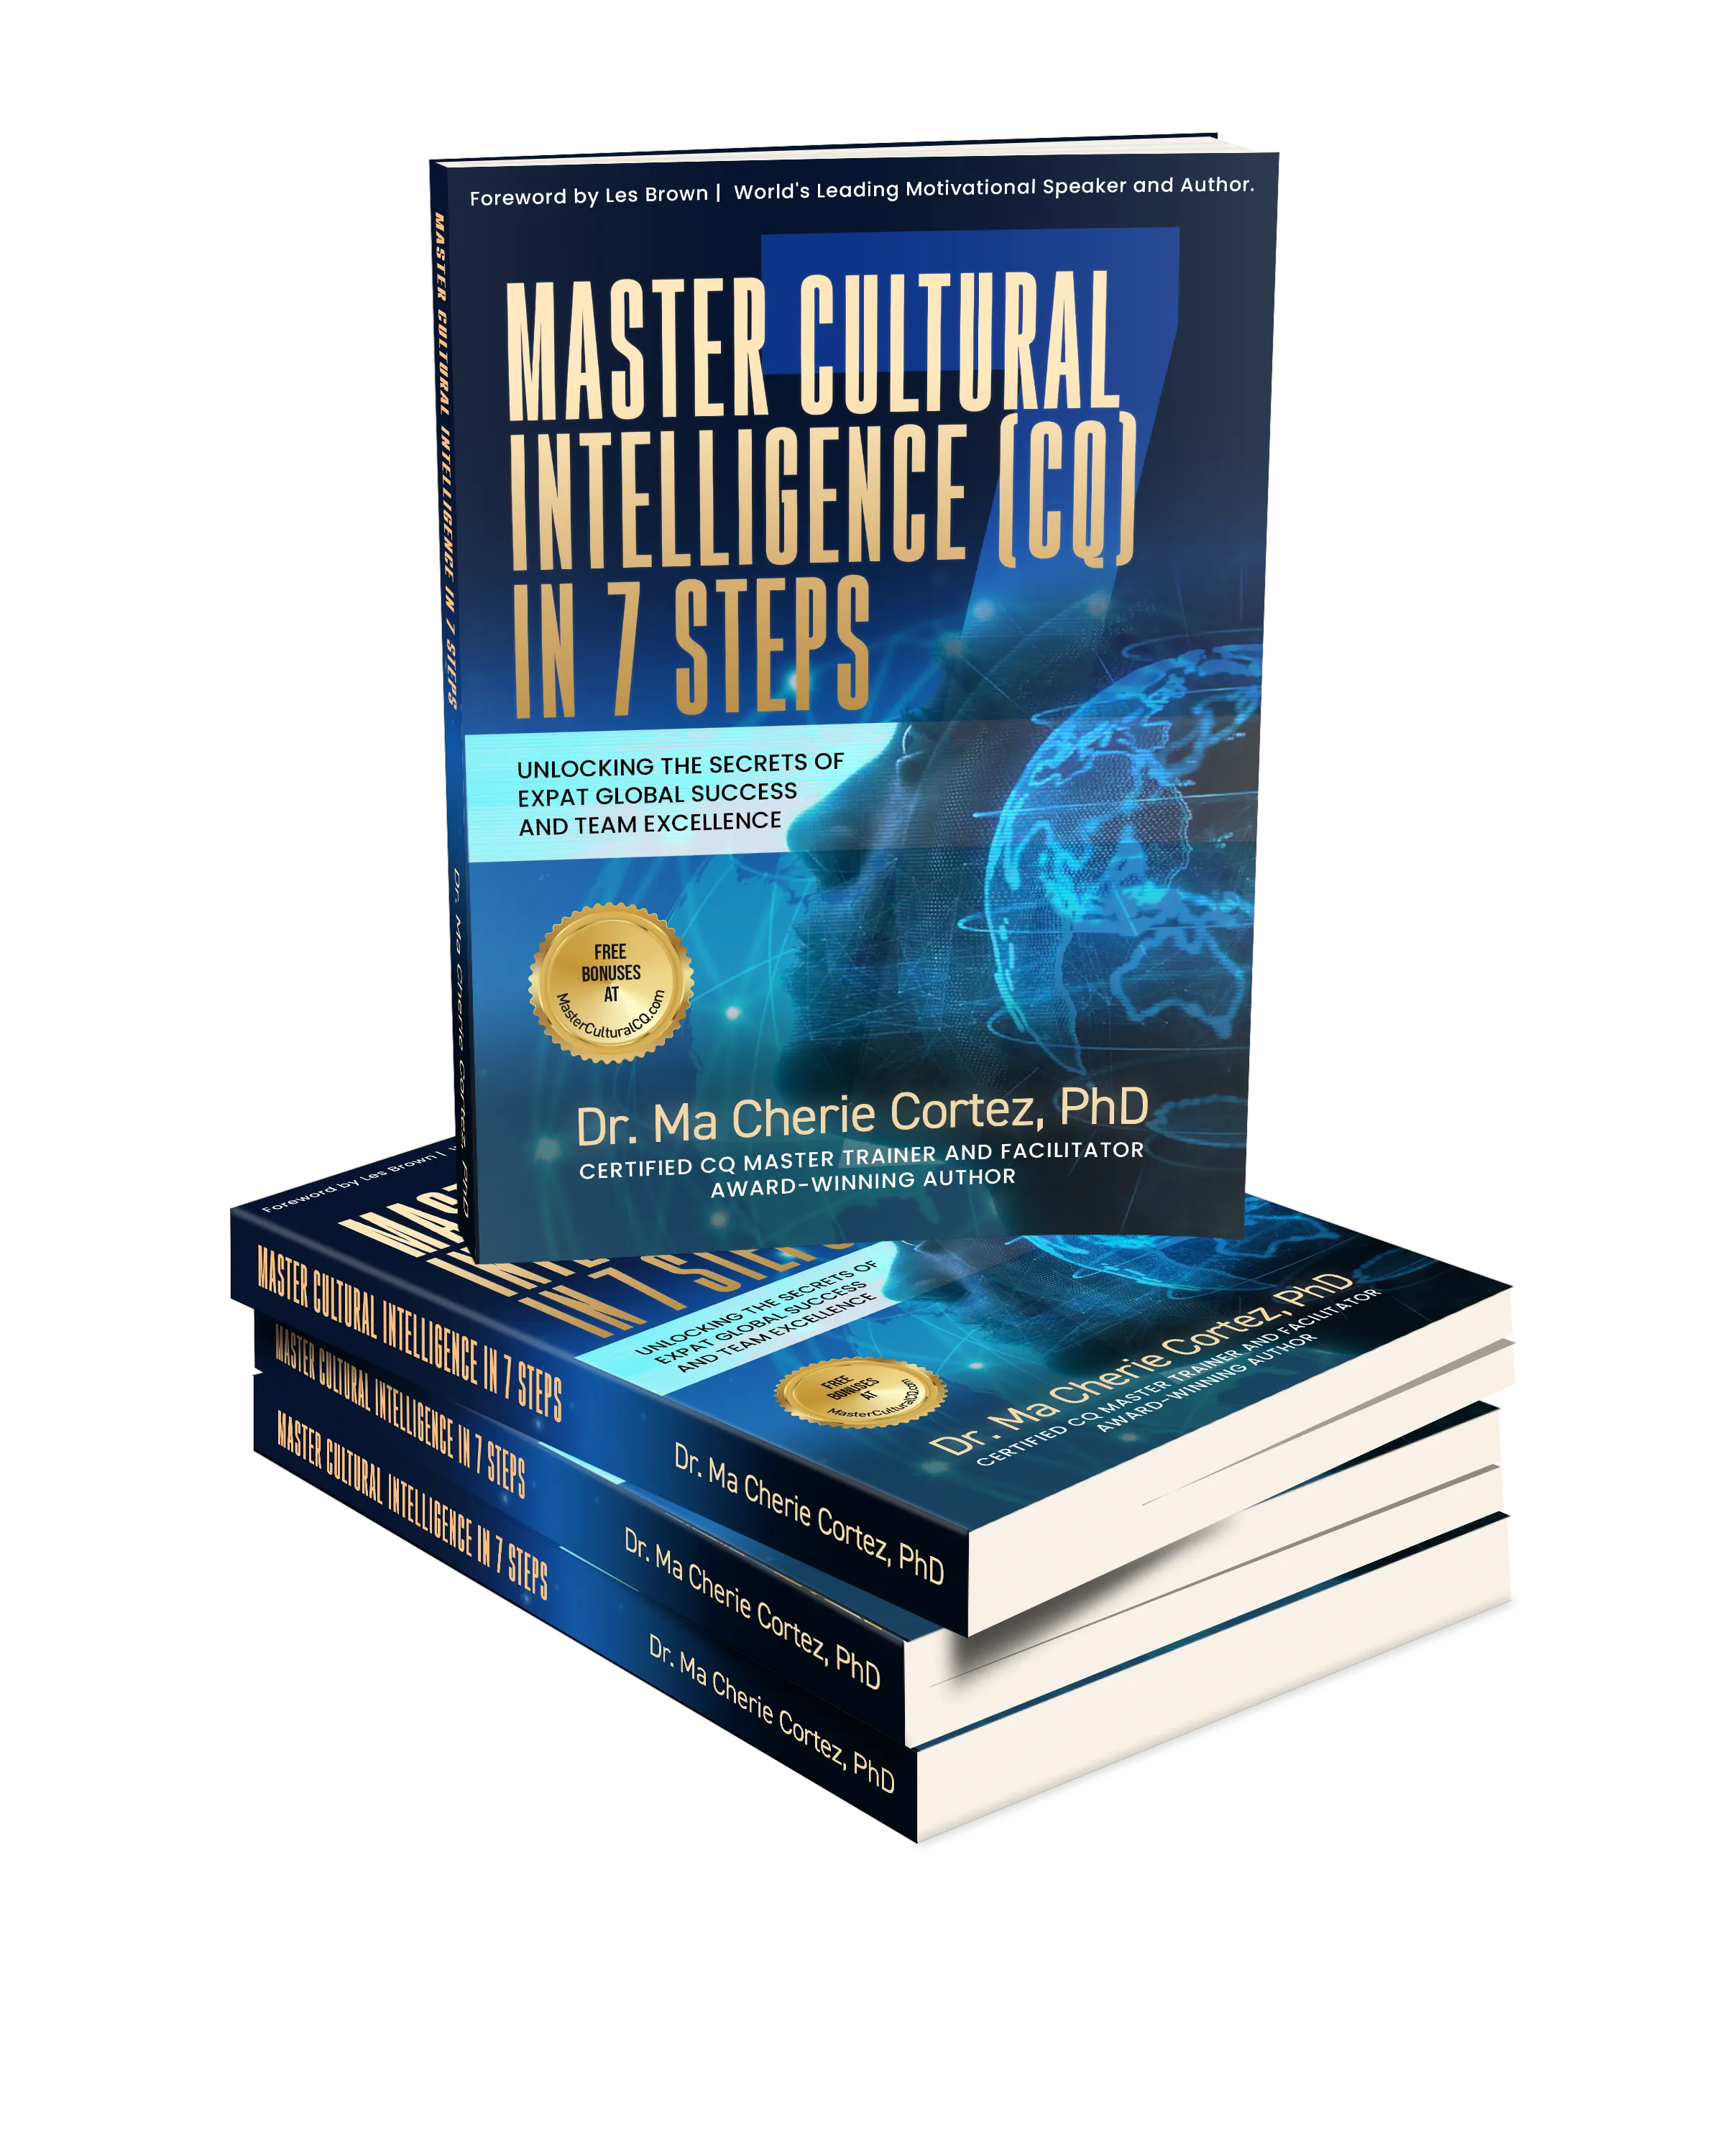 Master Cultural Intelligence in 7 Steps Unlocking Global Expat Success and Team Excellence by Dr. Ma Cherie Cortez. Grounded in academic research yet rich with practical applications, Dr. Cortez's book equips you with the tools to turn cultural diversity into your strategic advantage. Through real-life examples, interactive exercises, and a focus on empathy and inclusion, this book is your blueprint to fostering effective cross-cultural relationships and leading with cultural intelligence in any global setting.